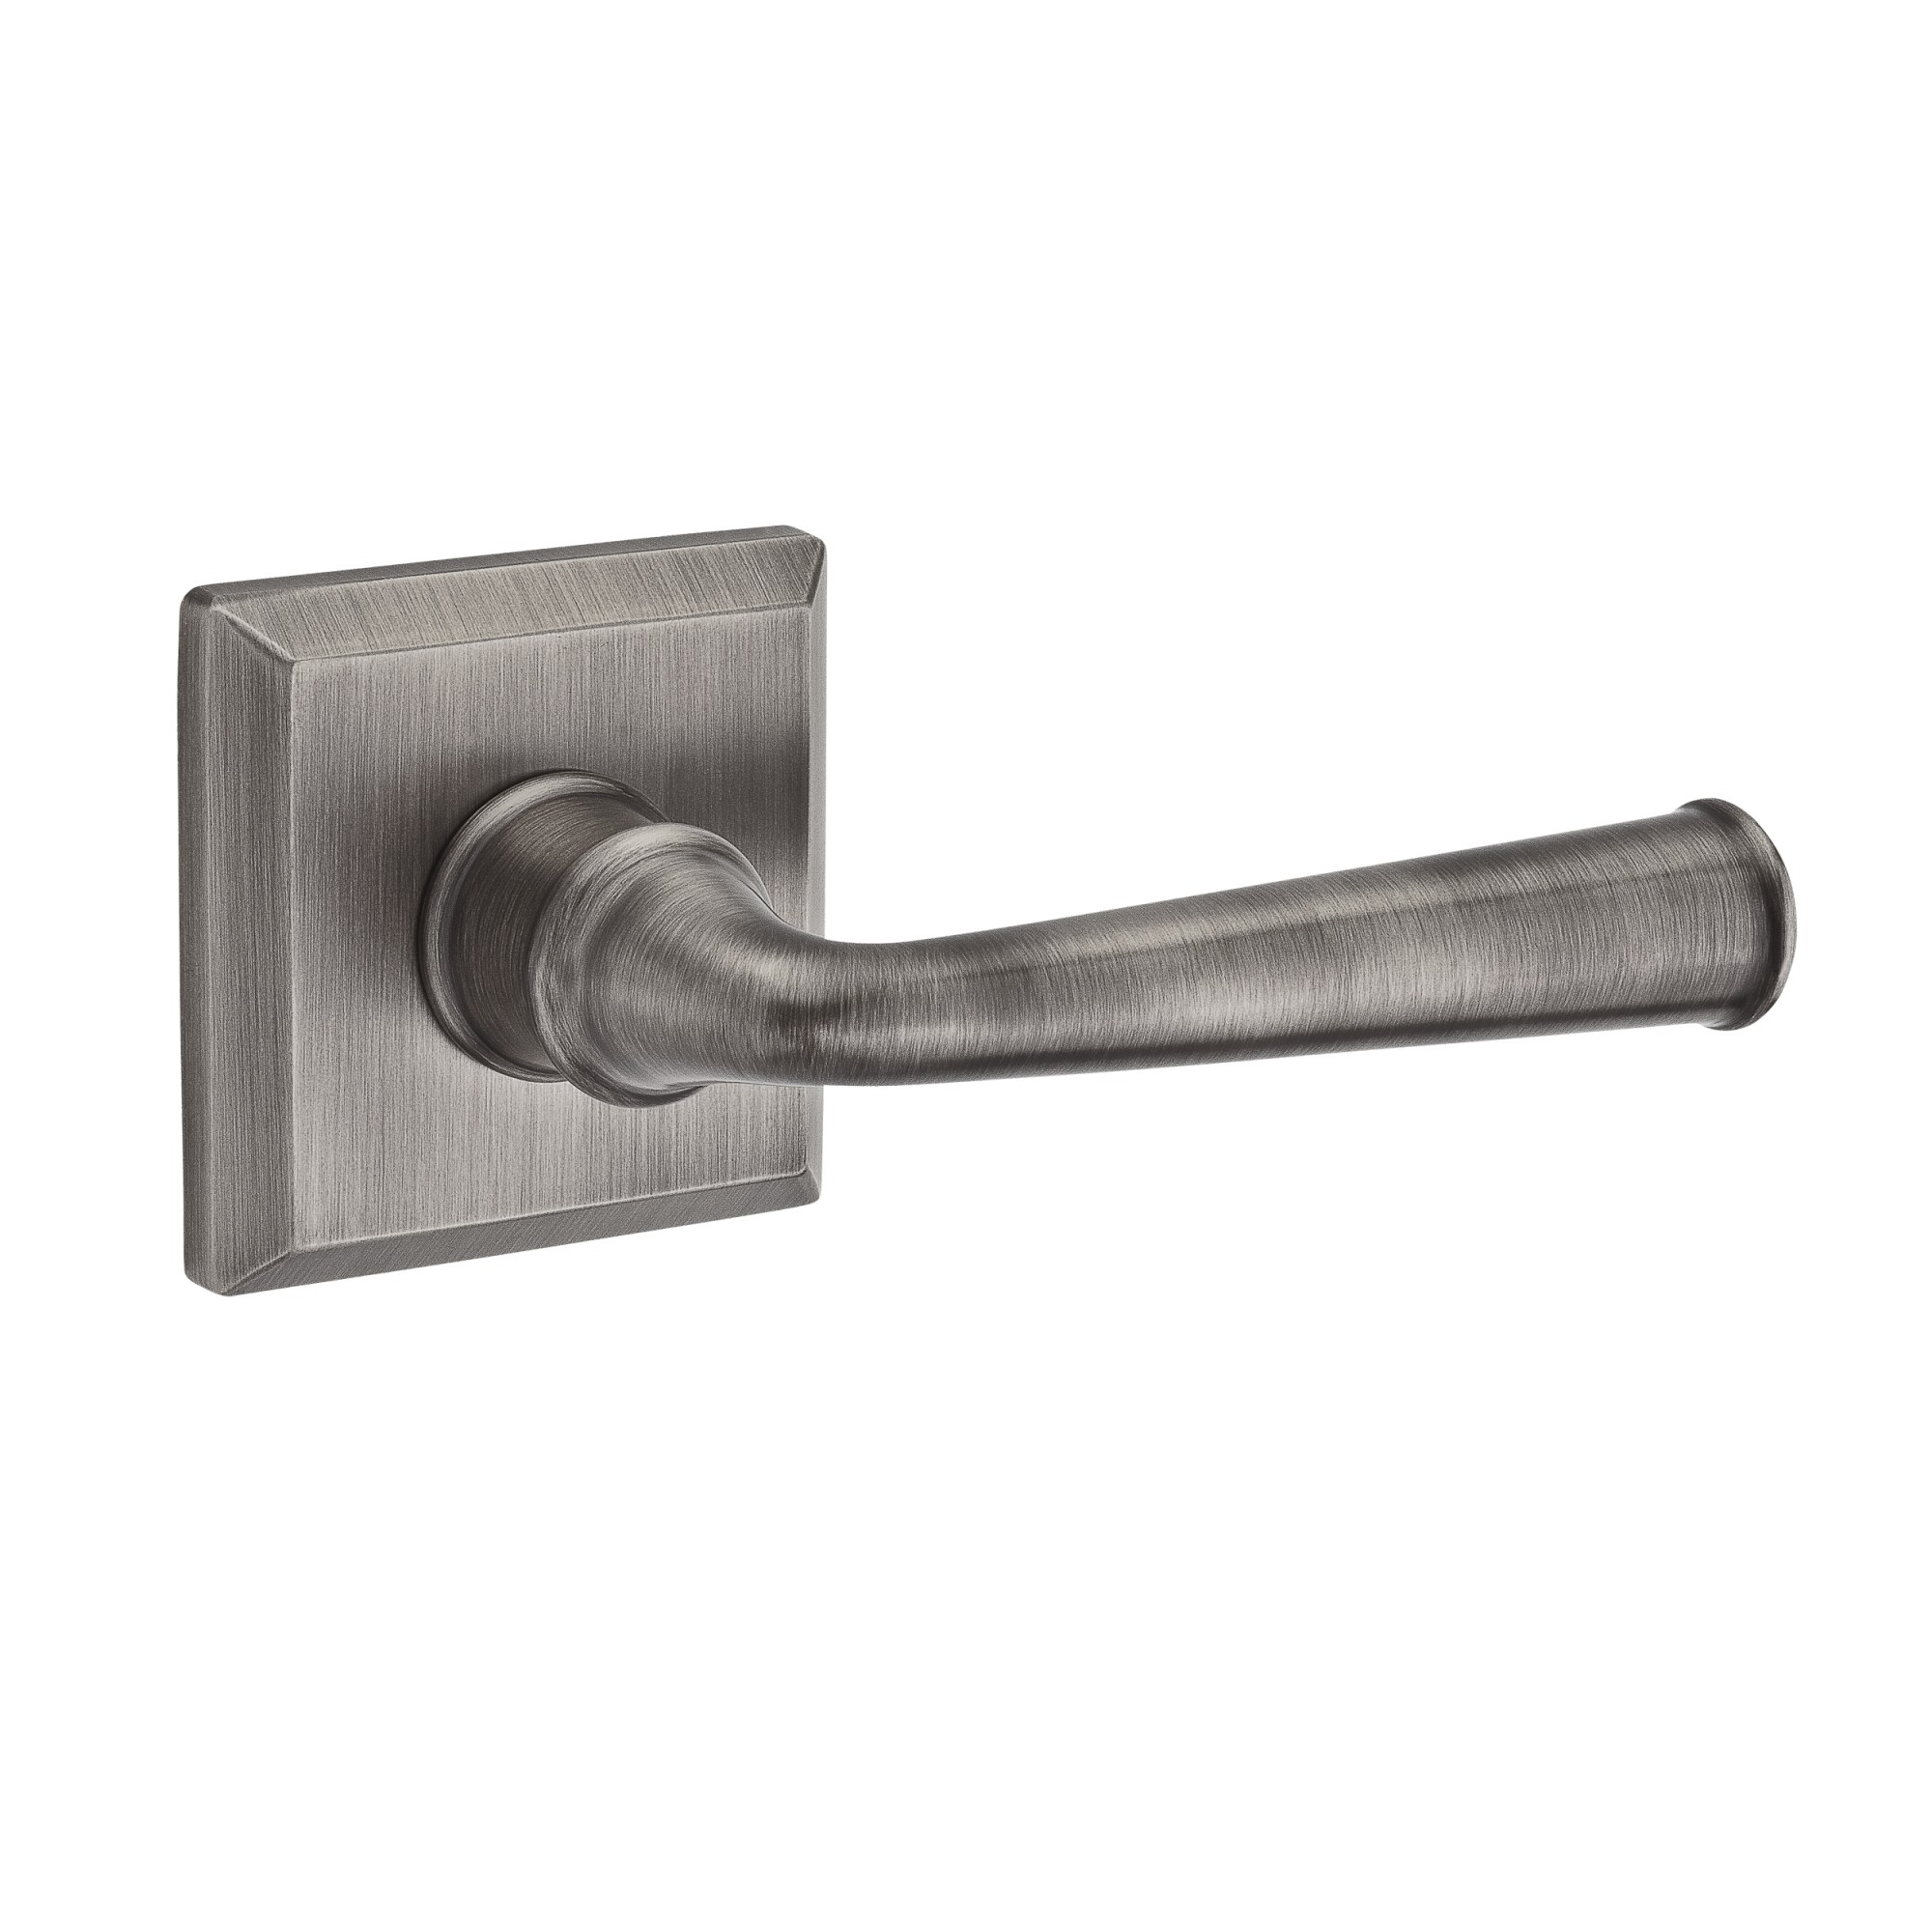 Baldwin Reserve HDFEDRTSR152 Door Handle Sets Half Dummy Right Hand Federal Lever and Traditional Square Rose Matte Antique Nickel Finish - image 1 of 3